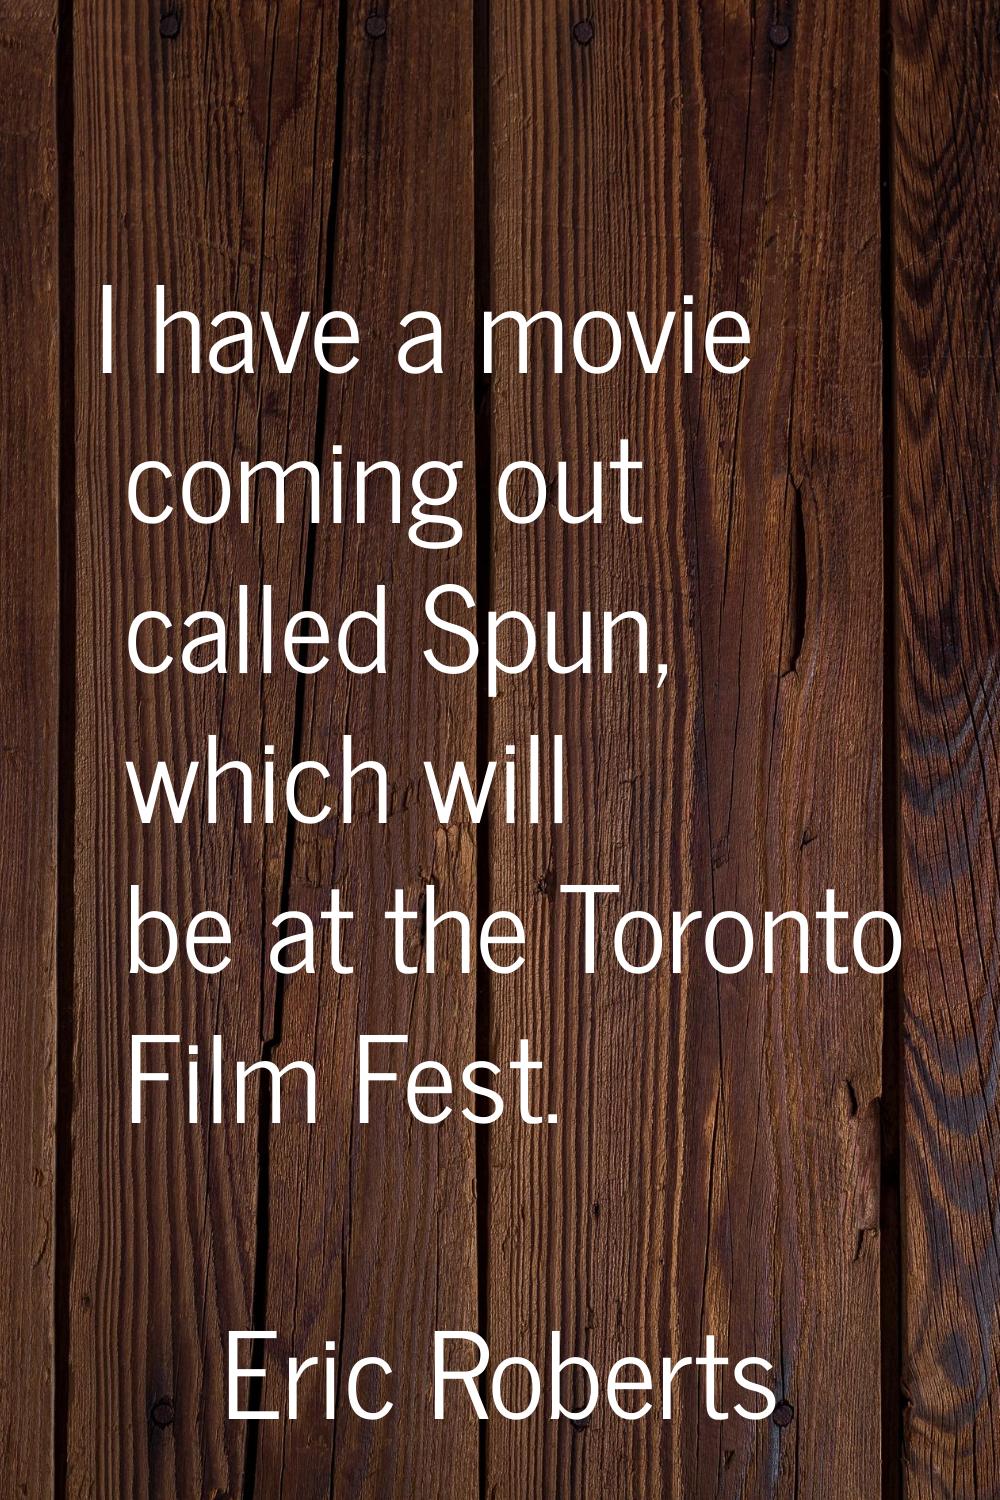 I have a movie coming out called Spun, which will be at the Toronto Film Fest.